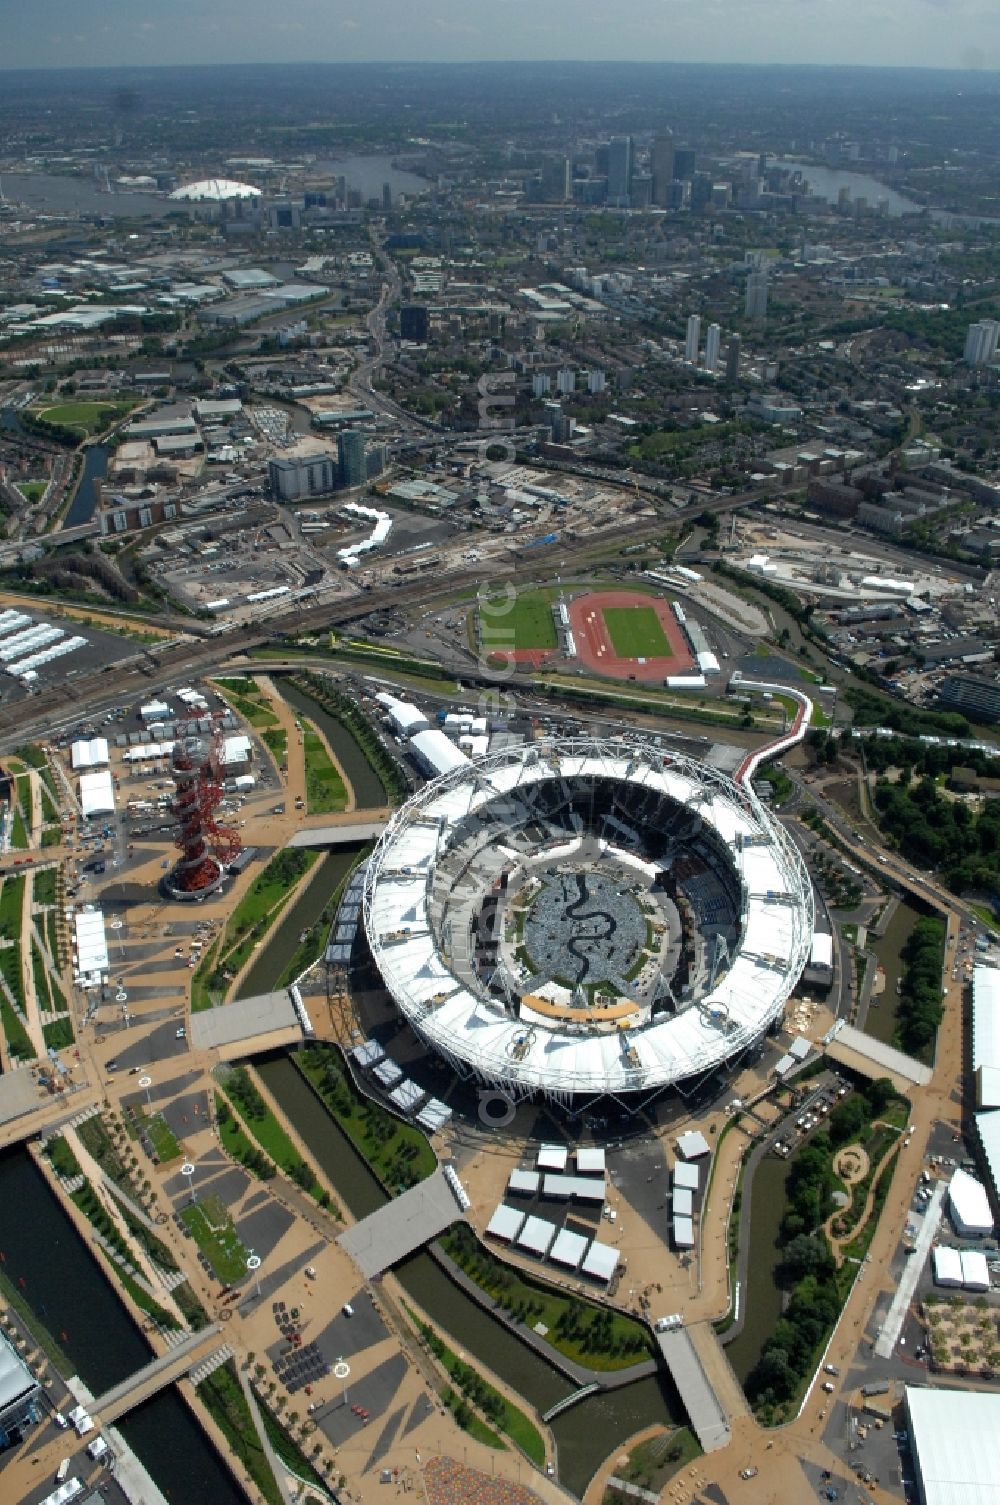 London from above - The Olympic Stadium in Olympic Park, London, England, is designed to be the centrepiece of the 2012 Summer Olympics and 2012 Summer Paralympics, and the venue of the athletic events as well as the Olympic Games opening and closing ceremonies in Great Britain